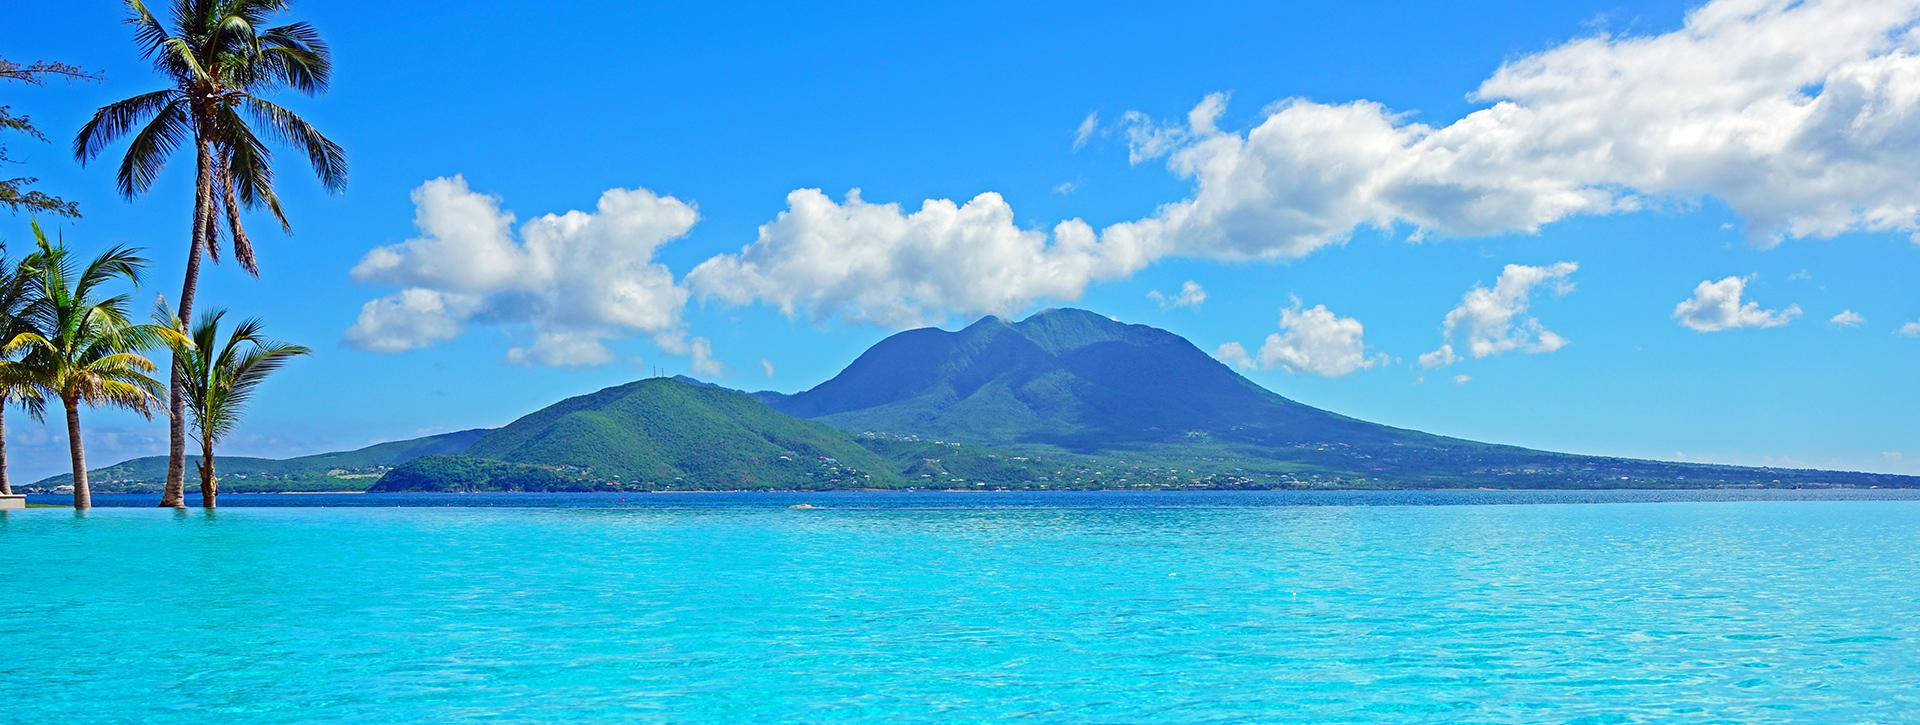 A Glimpse of Paradise - Tropical Island in St. Kitts and Nevis Wallpaper